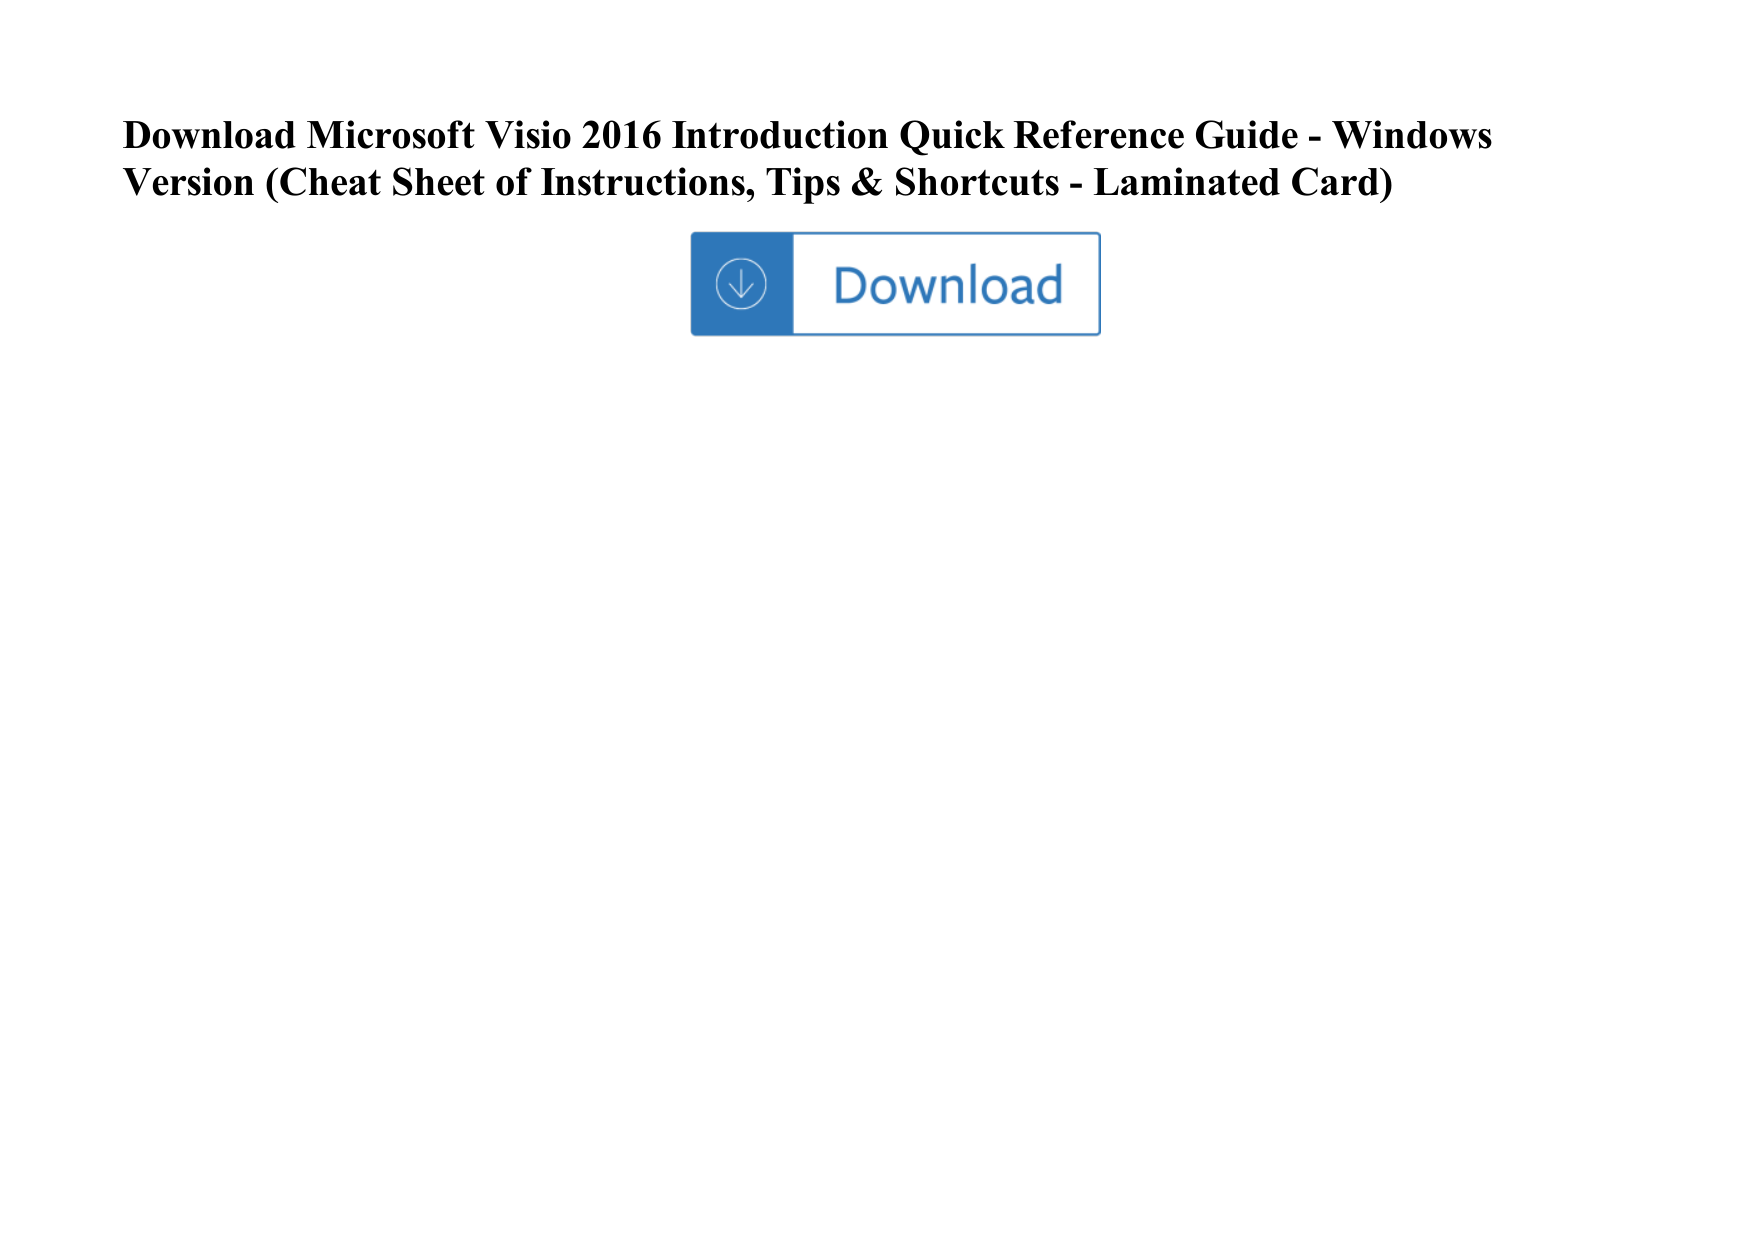 Page 1 of 2 - Microsoft Visio 2016 Introduction Quick Reference Guide - Windows Version (Cheat Sheet Of Instructions, Tips & Shortcuts L Microsoft-visio-2016-introduction-quick-reference-guide-windows-version-cheat-sheet-of-instructions-tips-shortcuts-laminated-car